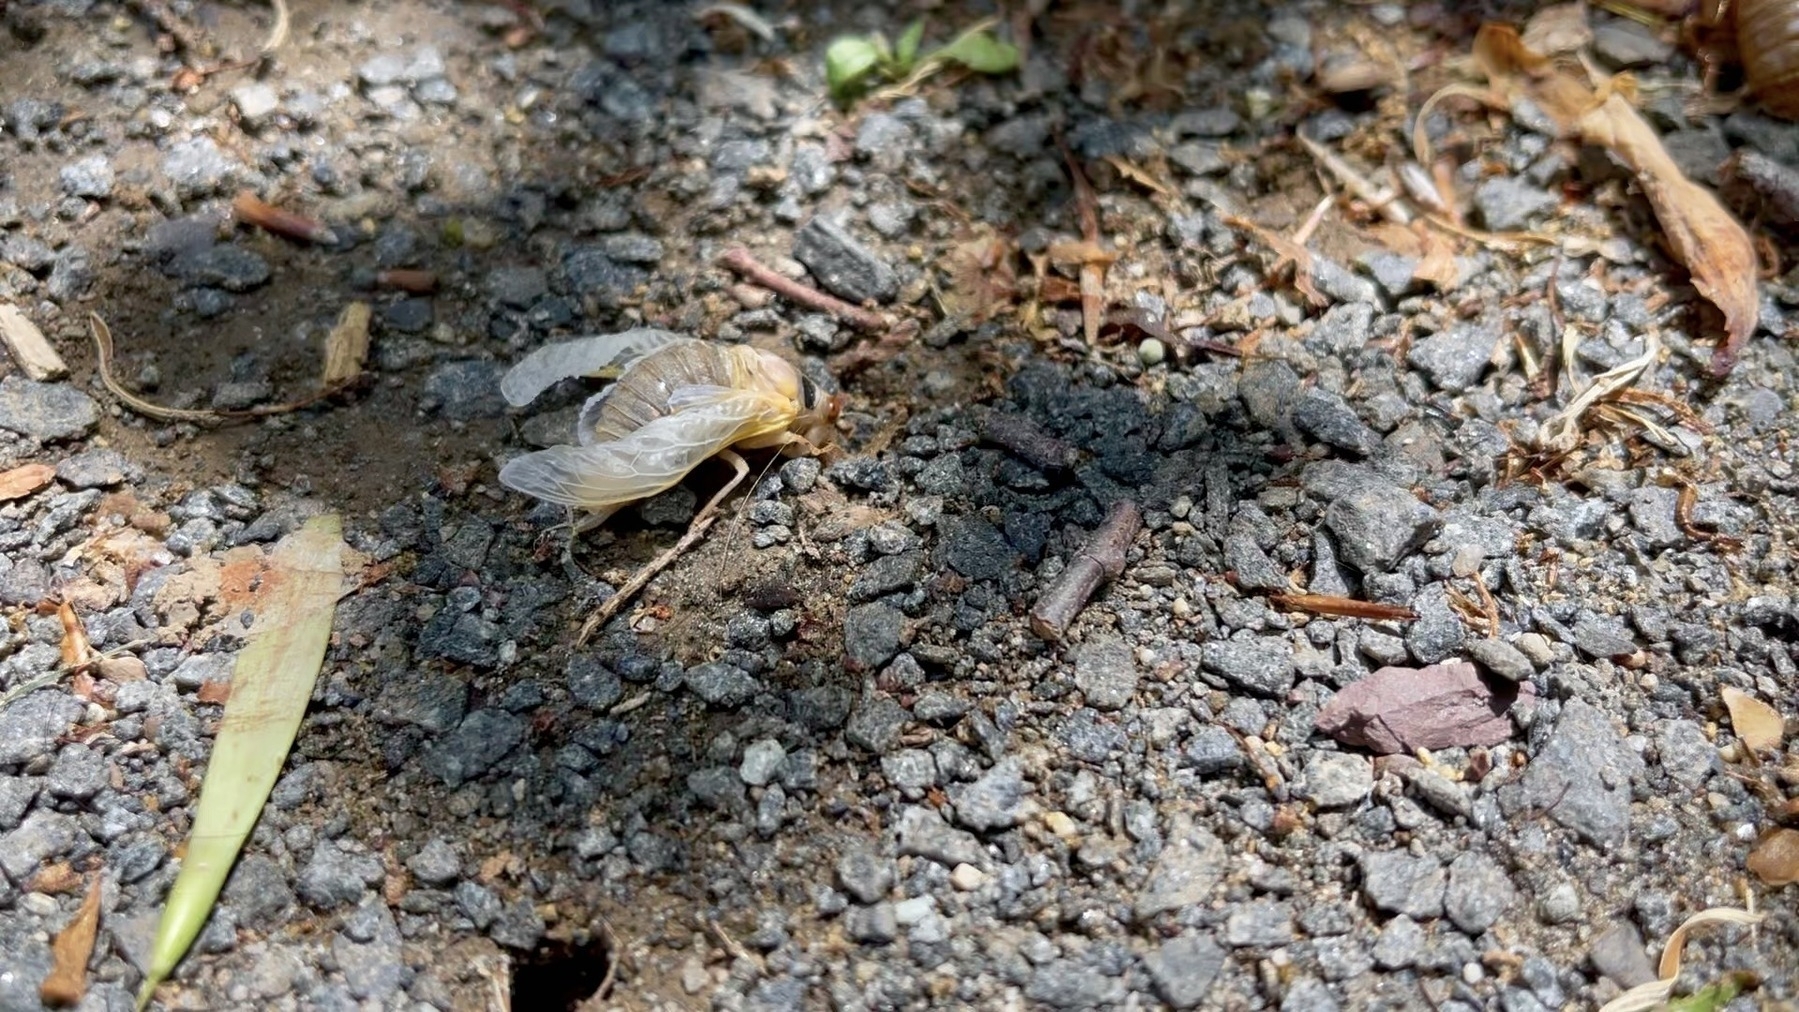 Cicada just emerged from the ground, still white in color